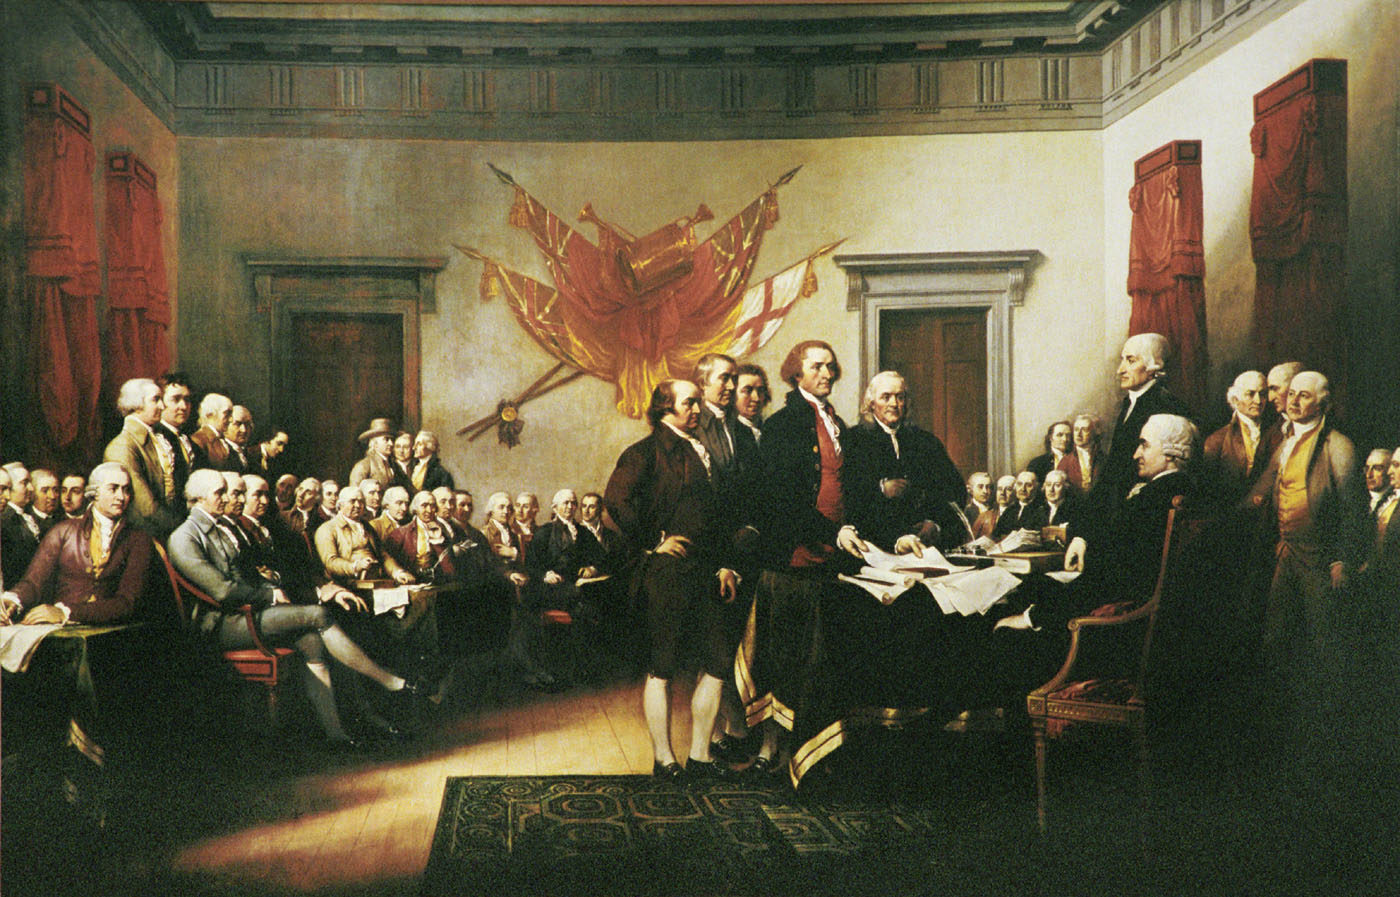 The Presentation of the Declaration of Independence, July 4, 1776